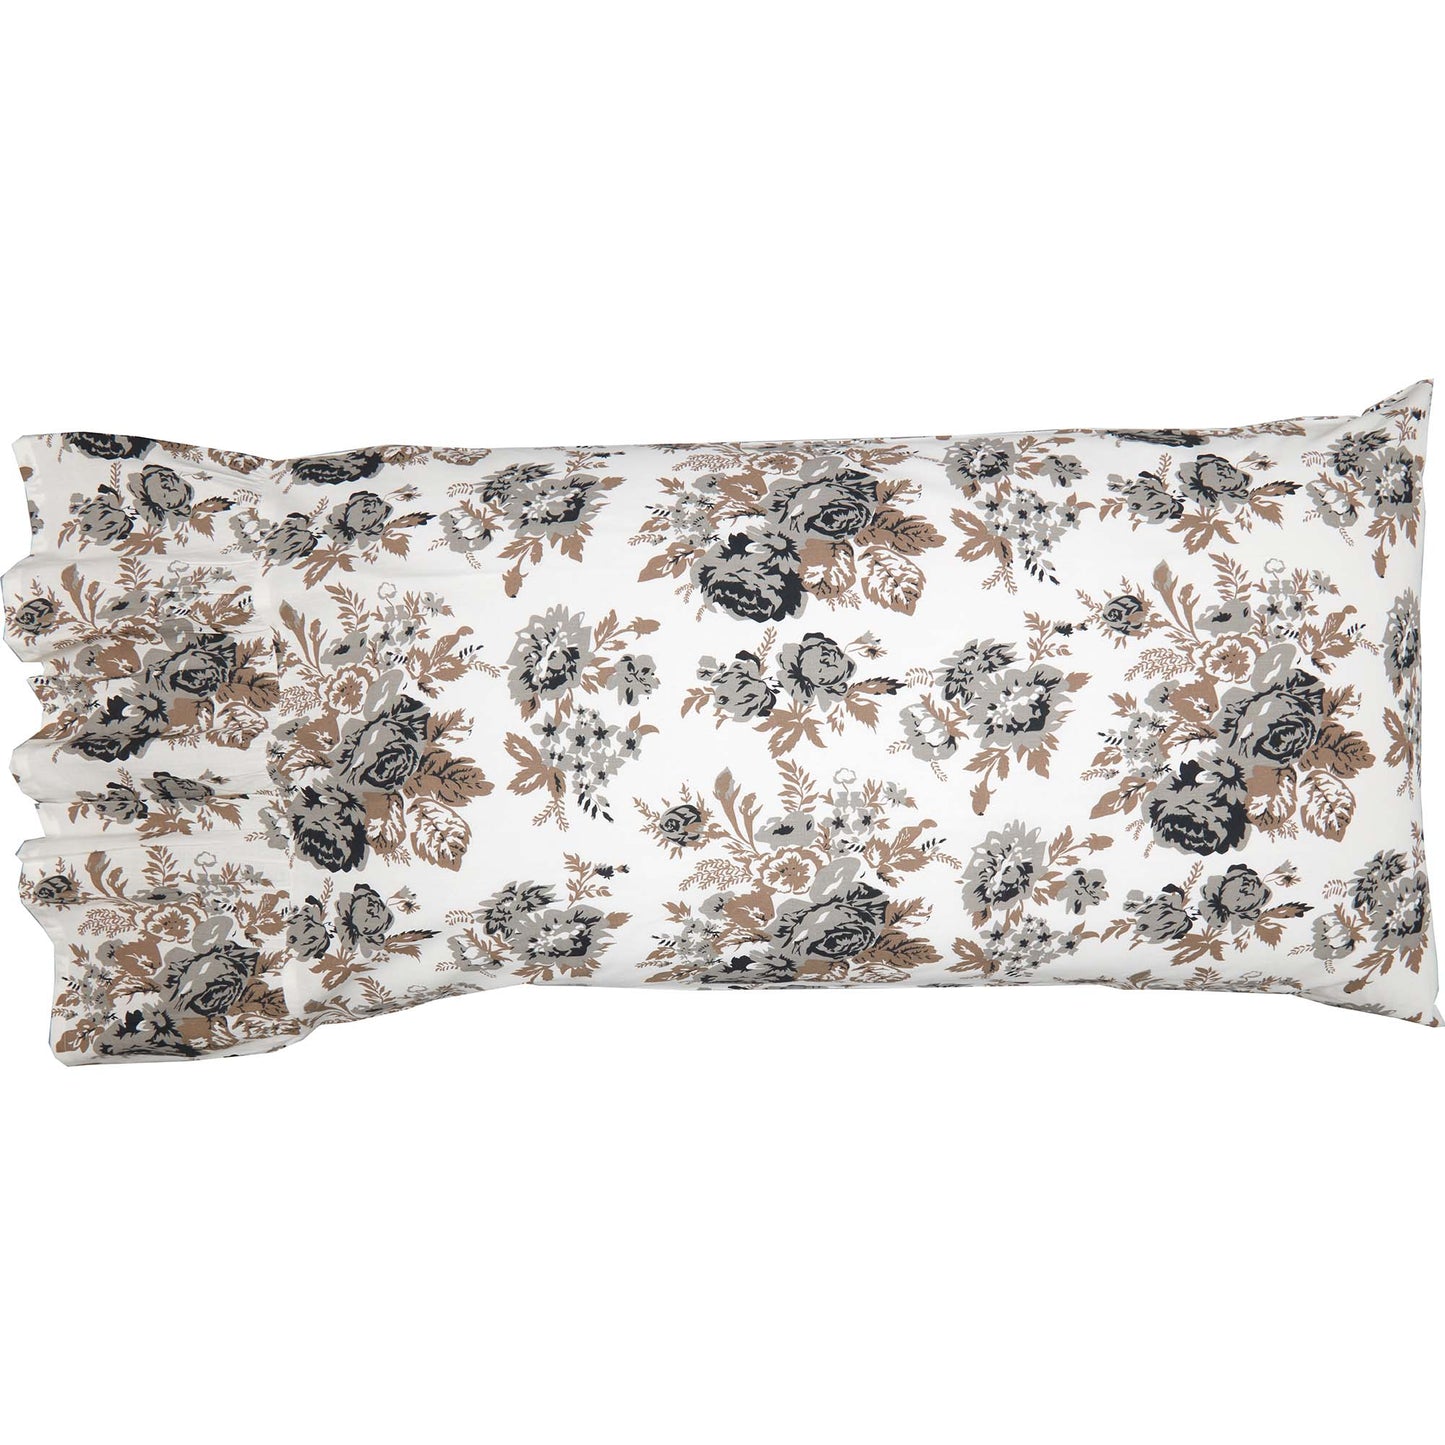 70017-Annie-Portabella-Floral-Ruffled-King-Pillow-Case-Set-of-2-21x36-8-image-3